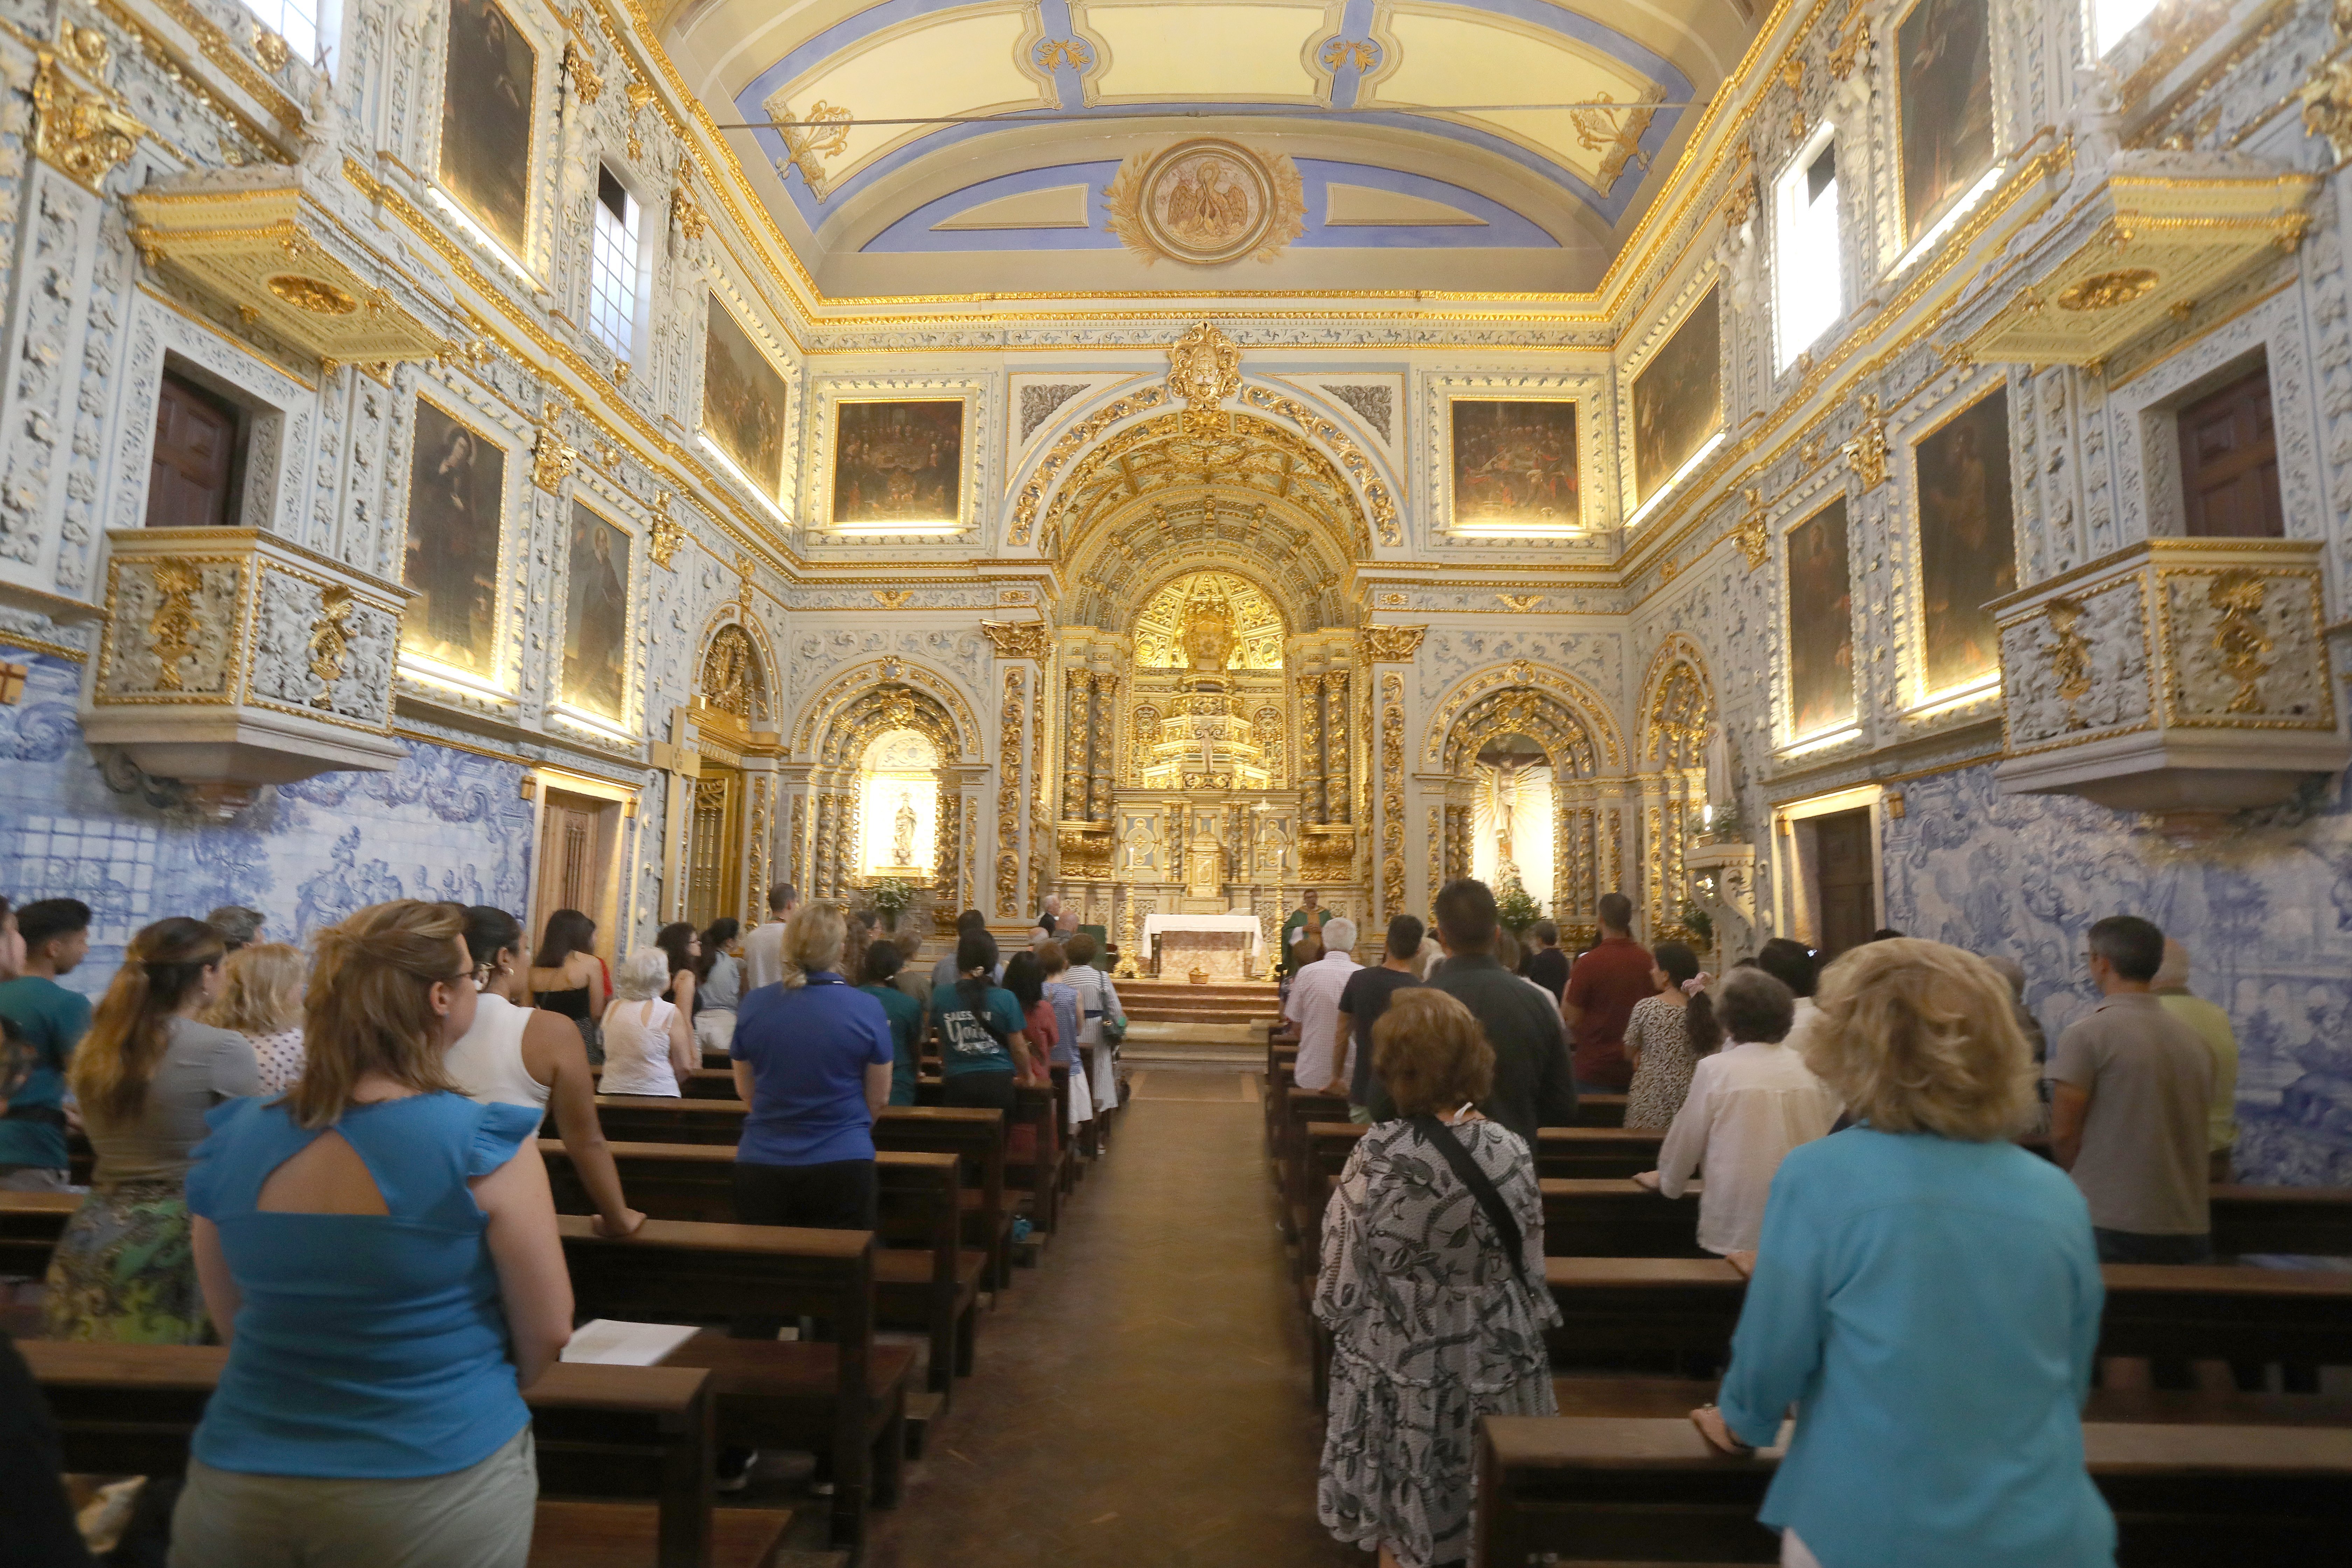 worshippers stand before pews in a beautiful church hall in Lisbon, Portugal